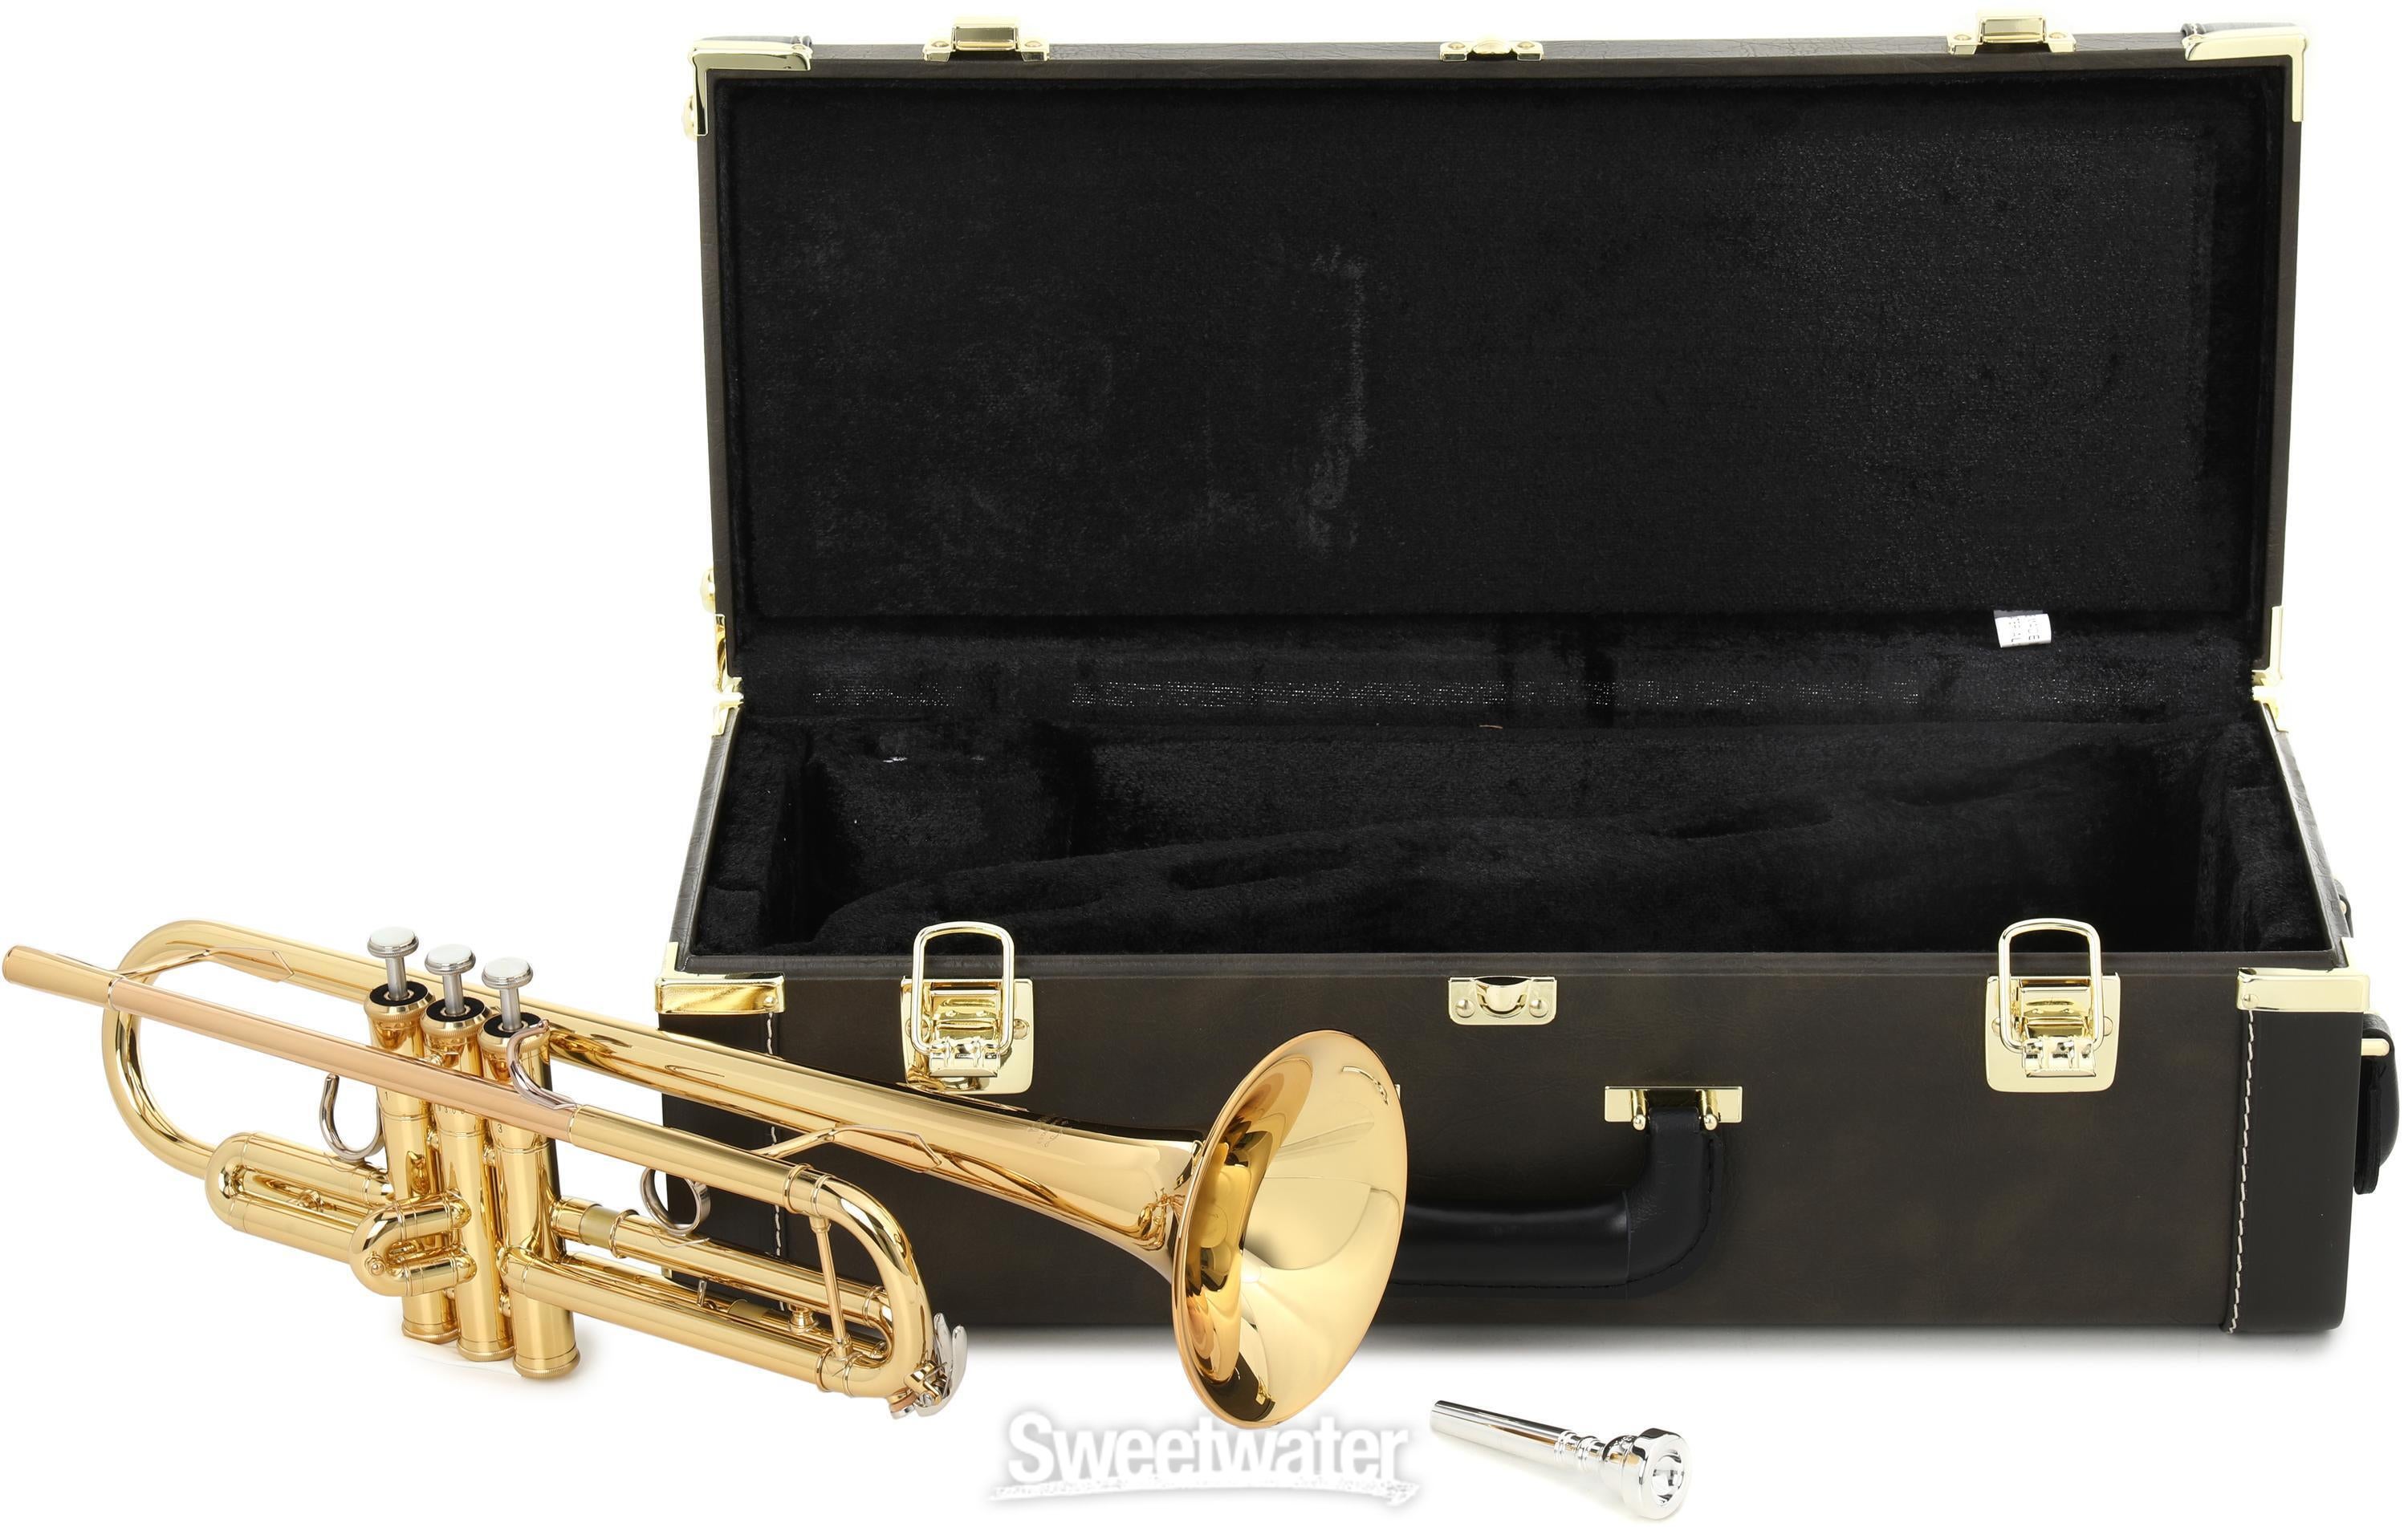 Yamaha YTR-6335 Professional Bb Trumpet - Gold Lacquer | Sweetwater